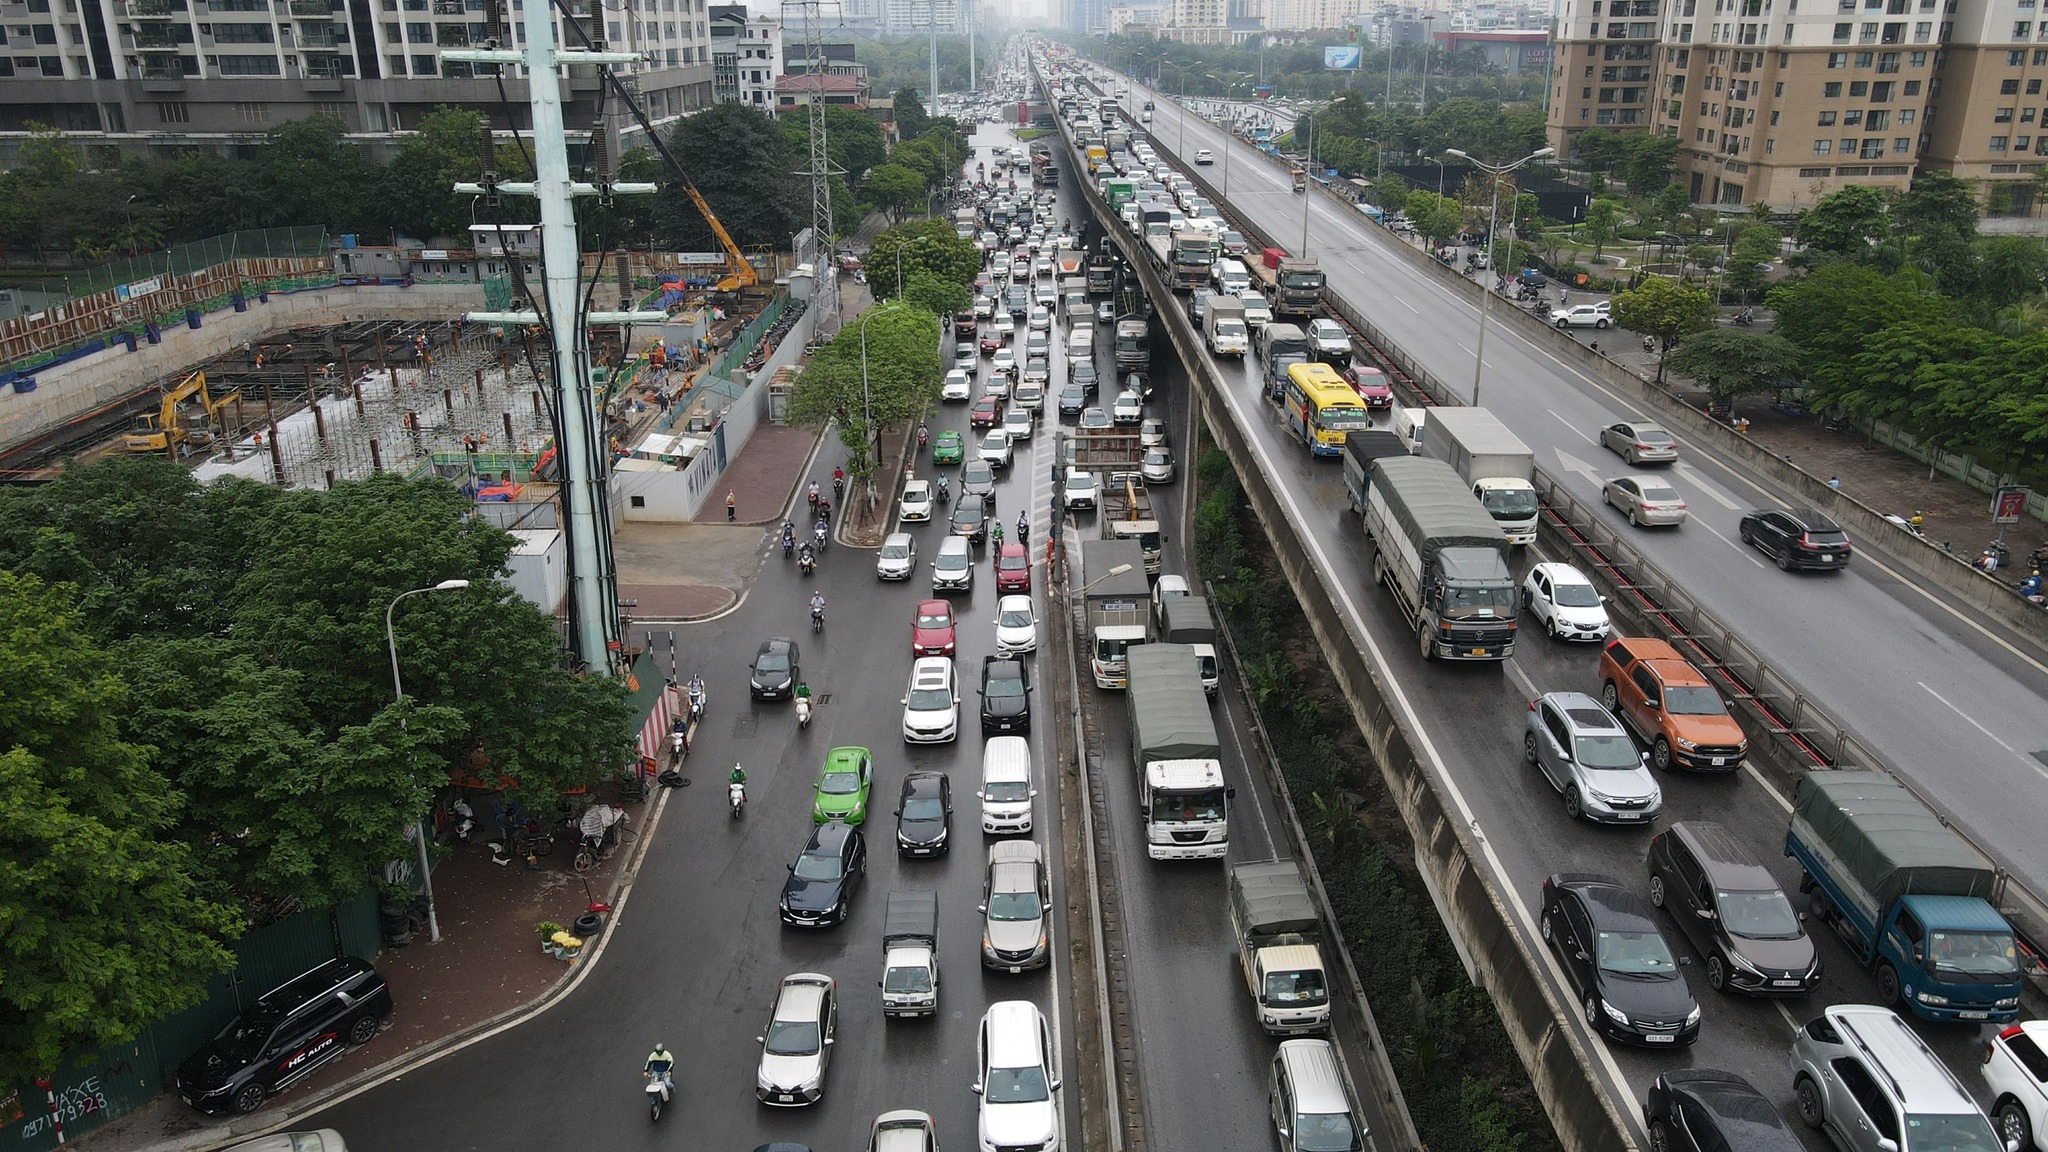 The queue of cars followed each other back to their hometowns for the holidays of April 30 and May 1, the streets of Hanoi and Ho Chi Minh City were congested - April 12